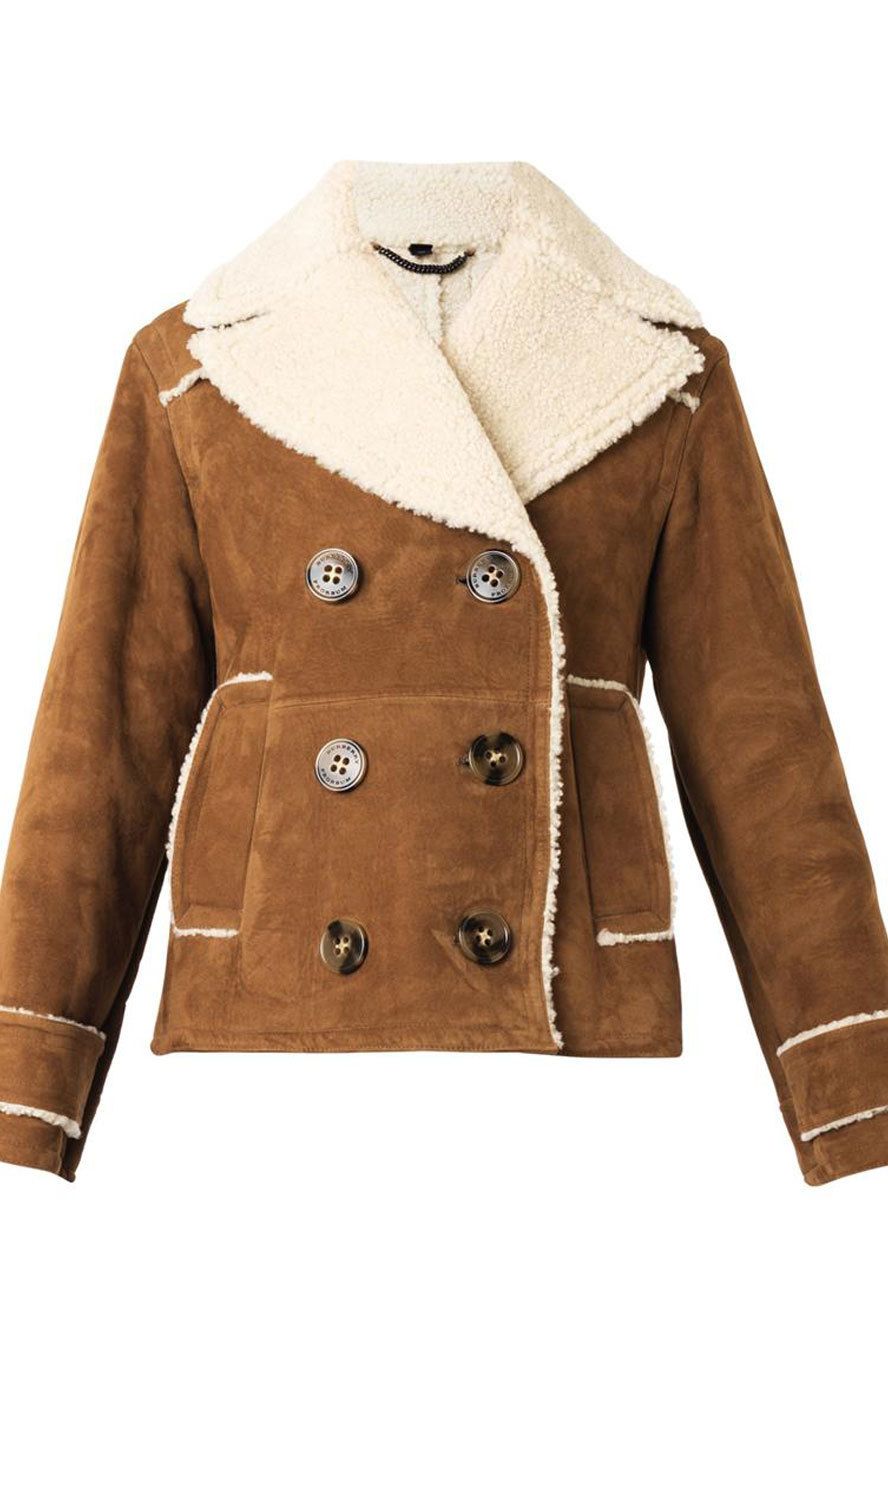 The Ultimate Shearling Jacket